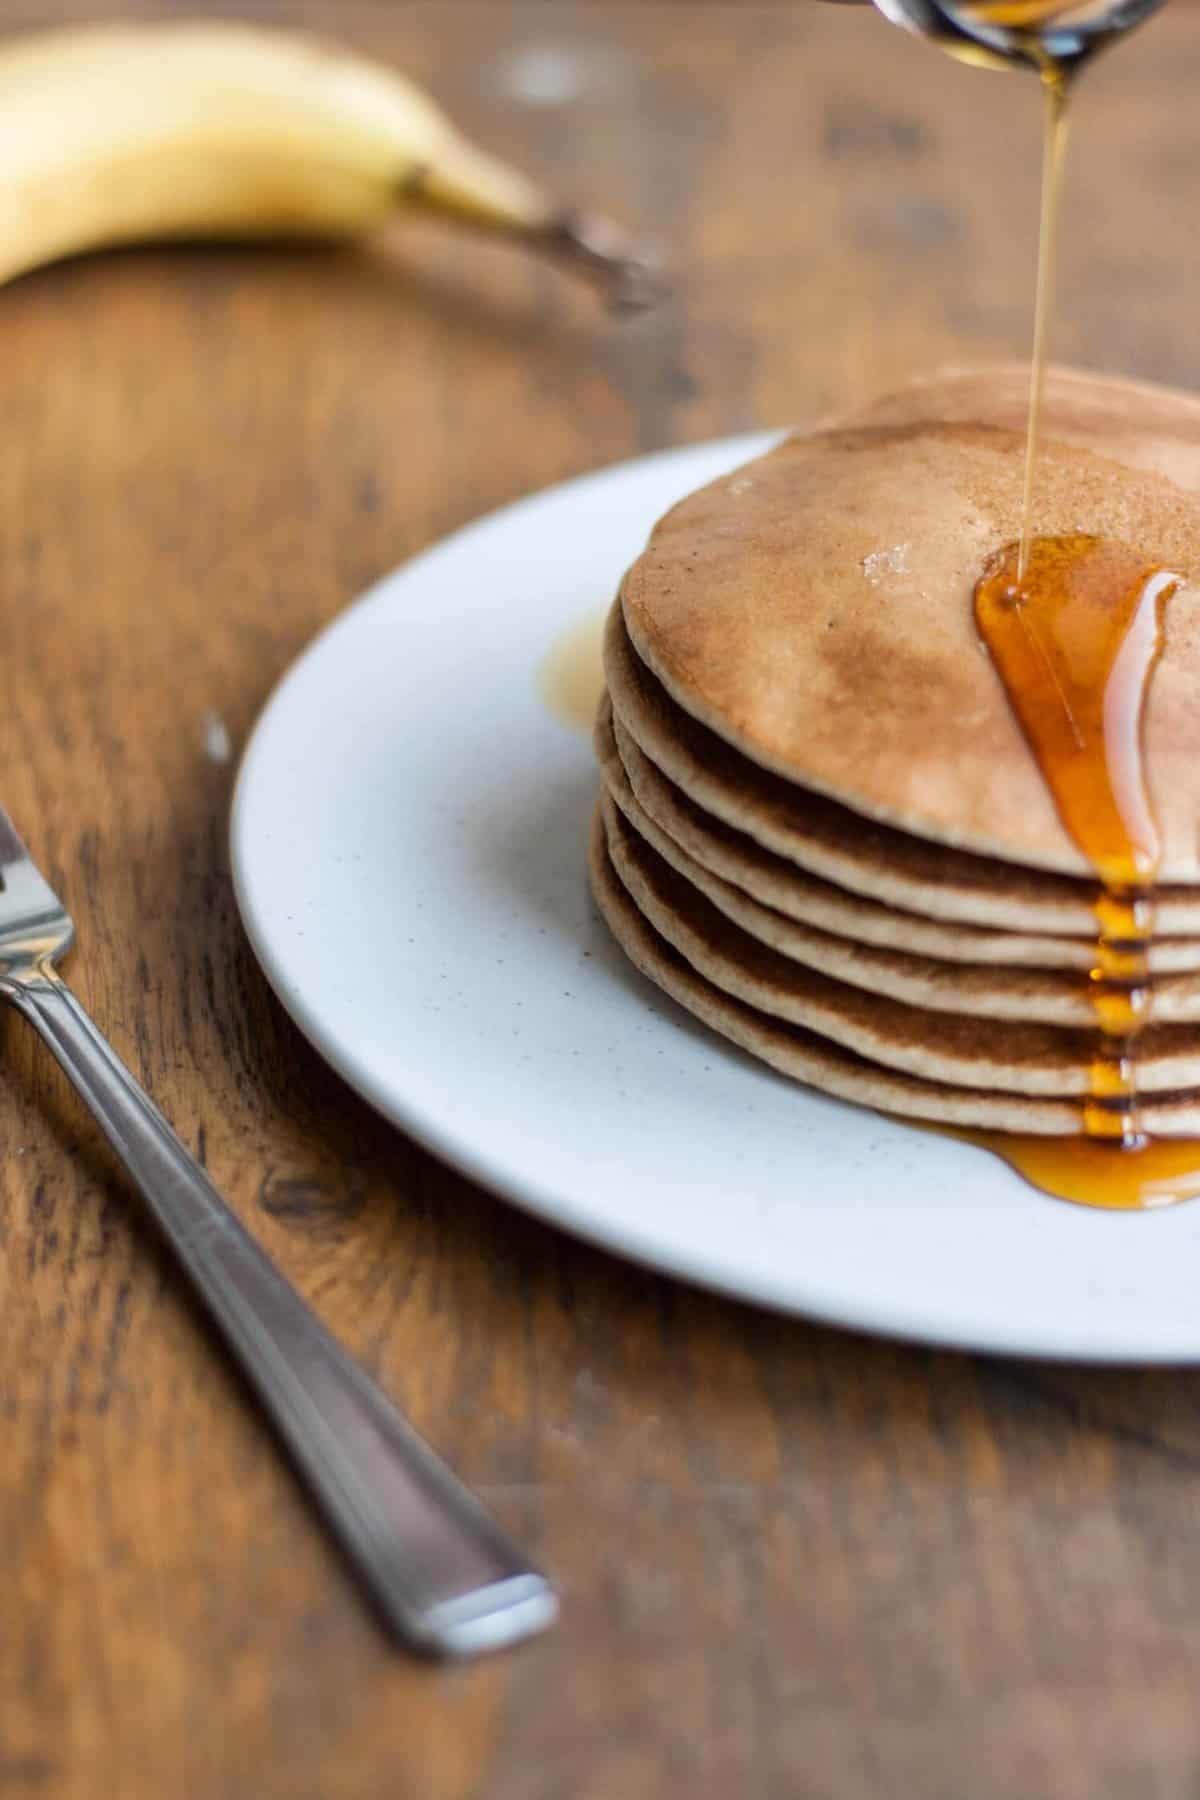 A plate with a stack of pancakes with a drizzle of maple syrup over the top.